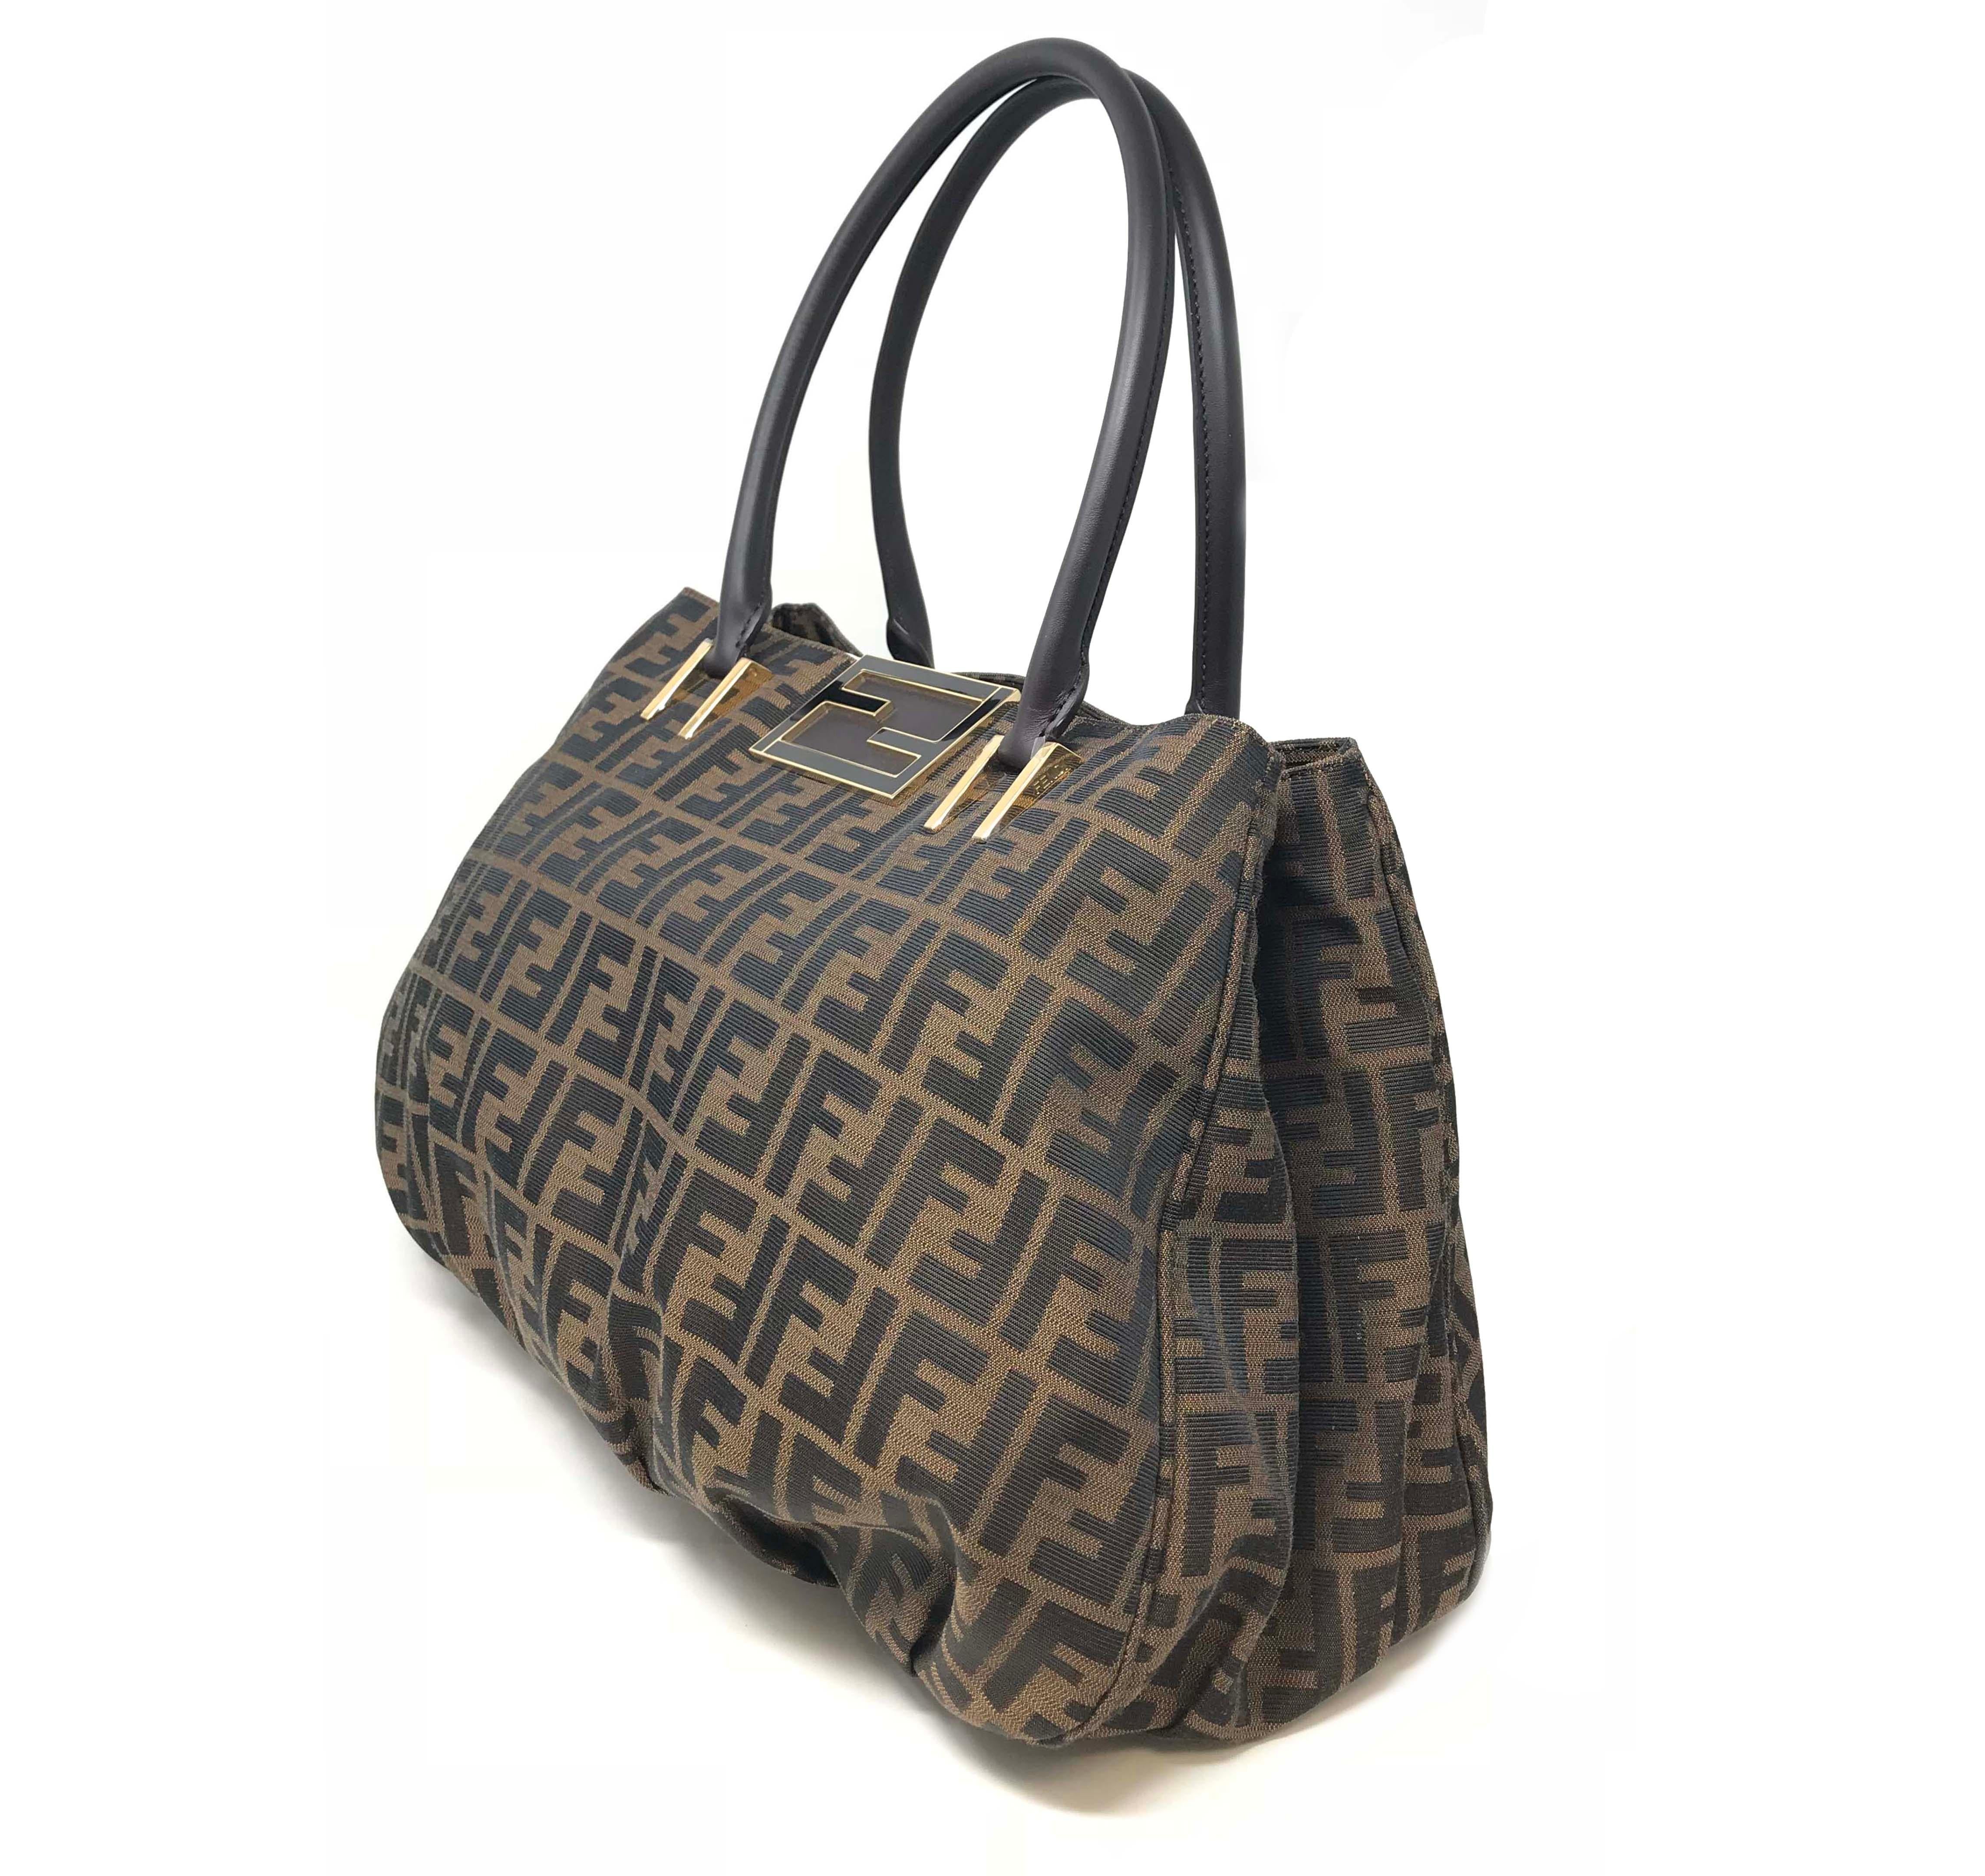 We guarantee this is an authentic FENDI Zucca Mia Tote Tobacco or 100% of your money back. This stylish tote is crafted of traditional Fendi FF Zucca tonal brown canvas. The bag features gold chain black patent leather threaded top handles as well